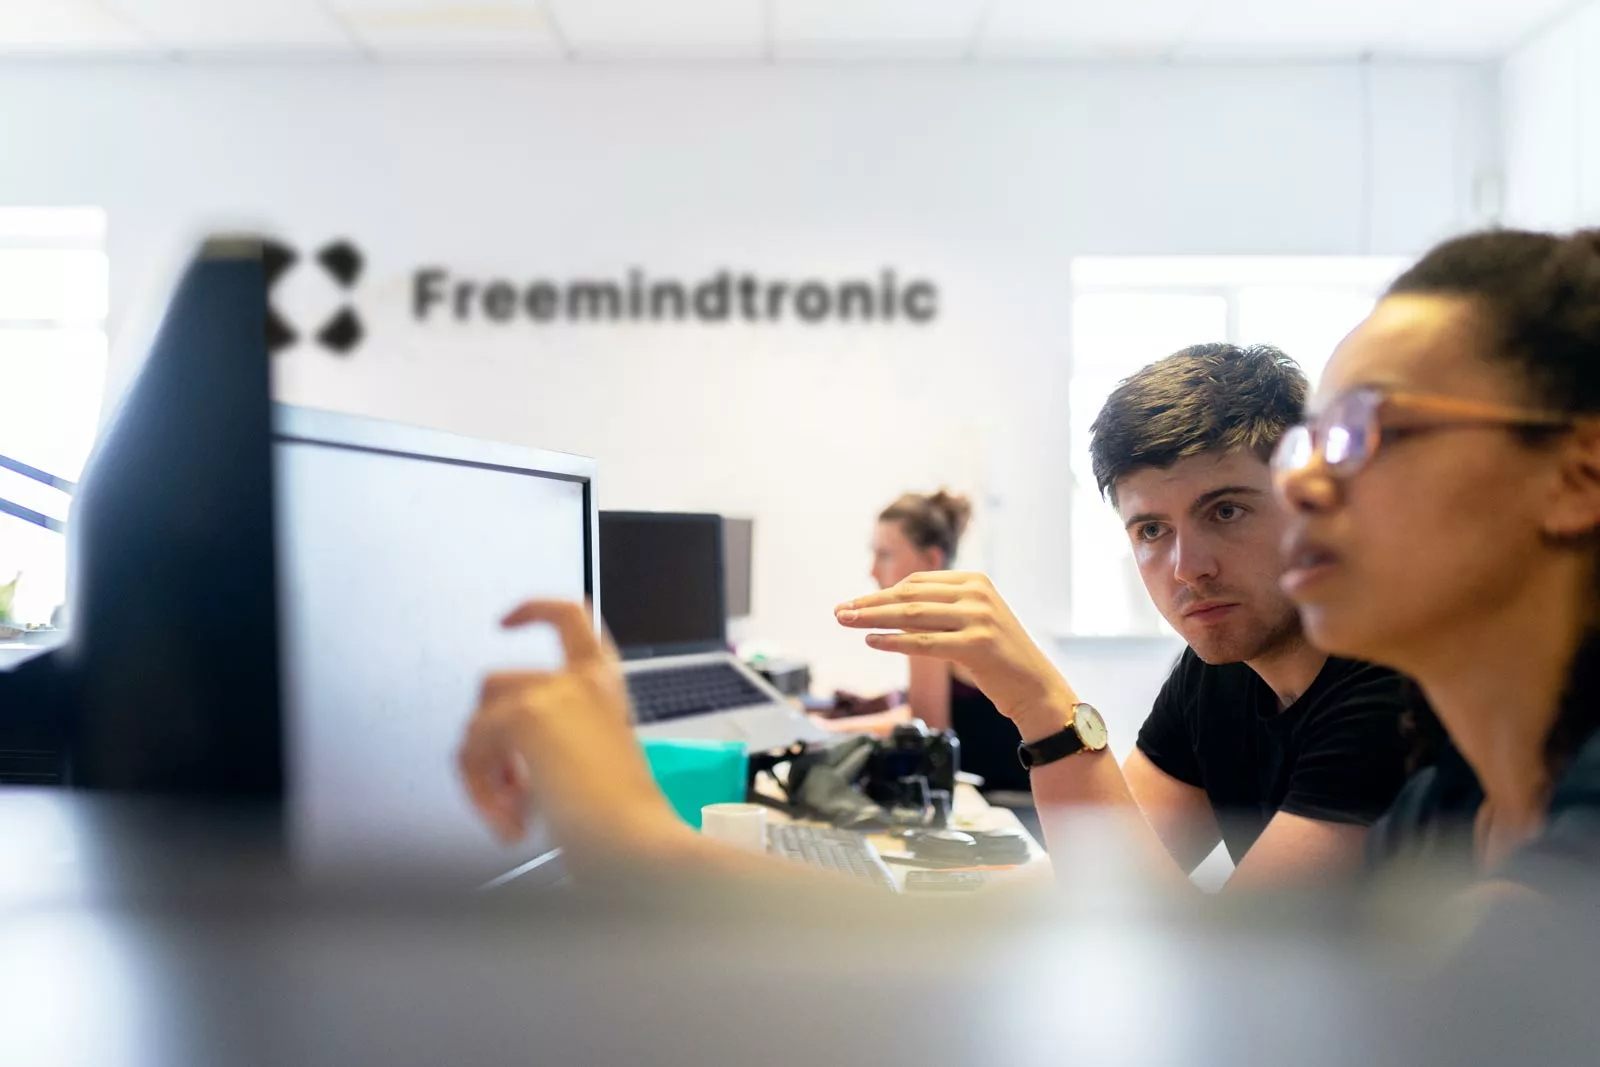 Compatibility Test with freemindtronic technologies